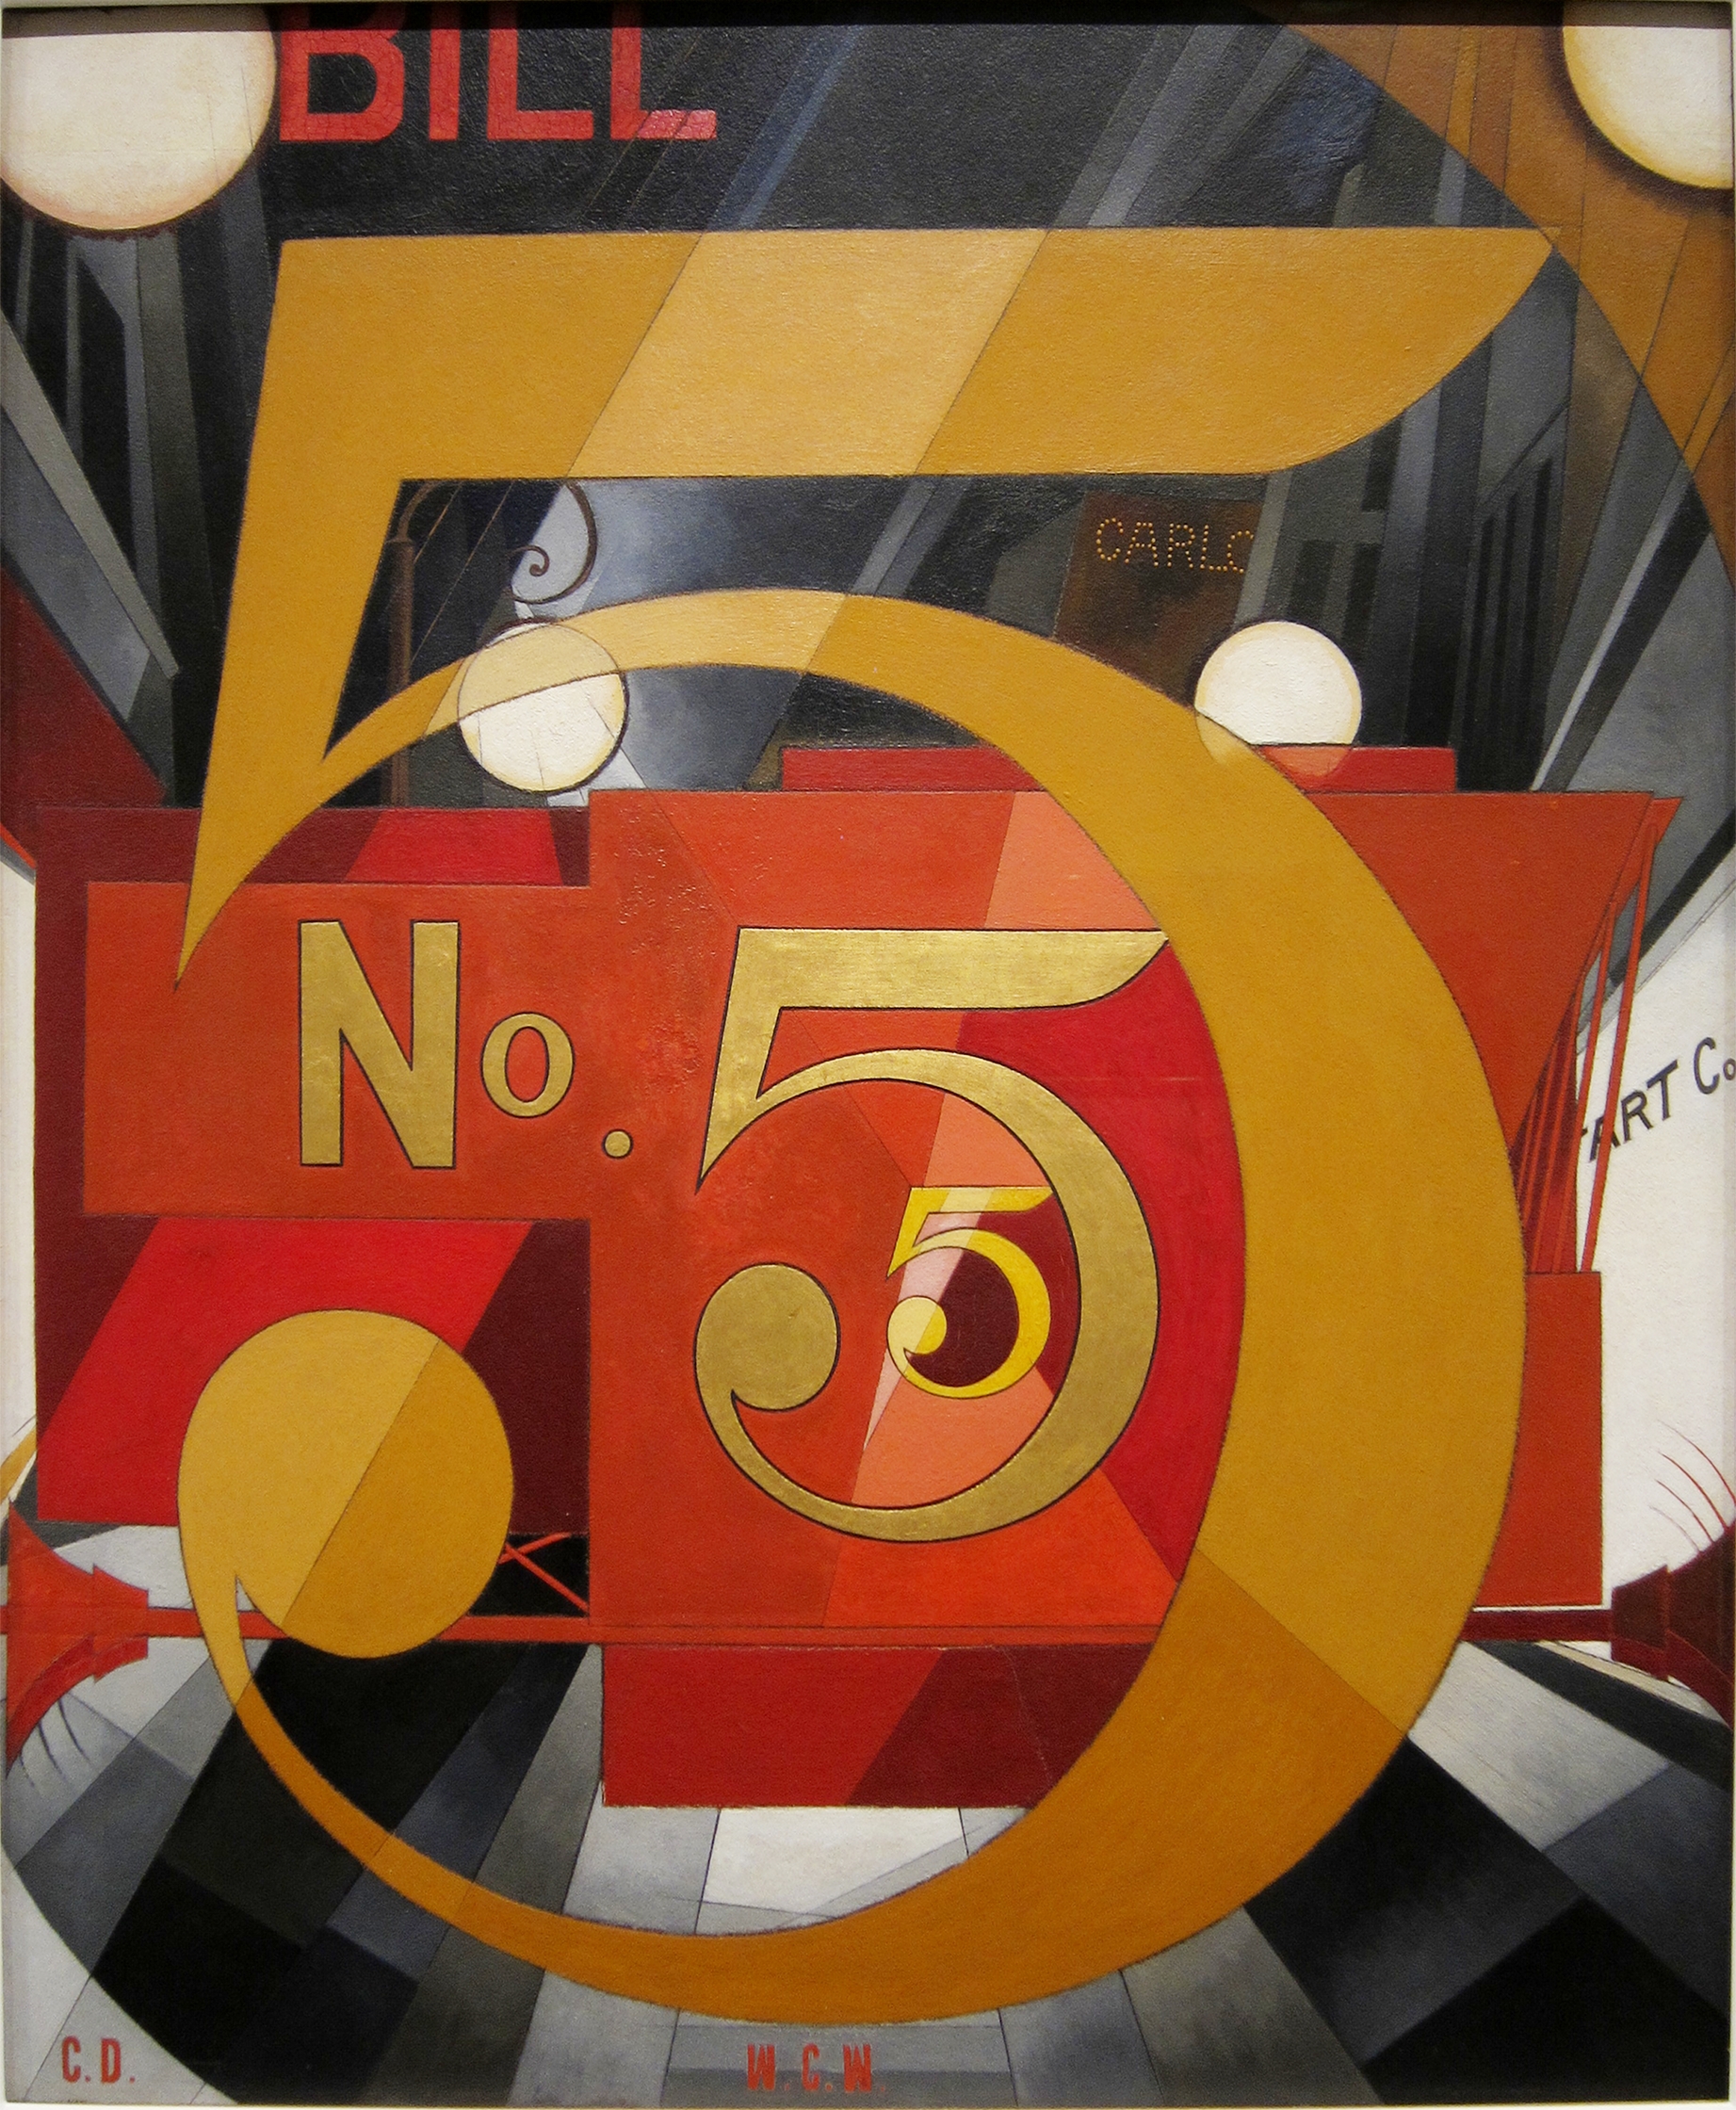 Charles Sheeler, I Saw the Figure 5 in Gold, 1928, oil, graphite, ink, and gold leaf on paperboard, 90.2 × 76.2 cm, Alfred Stieglitz Collection, The Metropolitan Museum of Art, New York